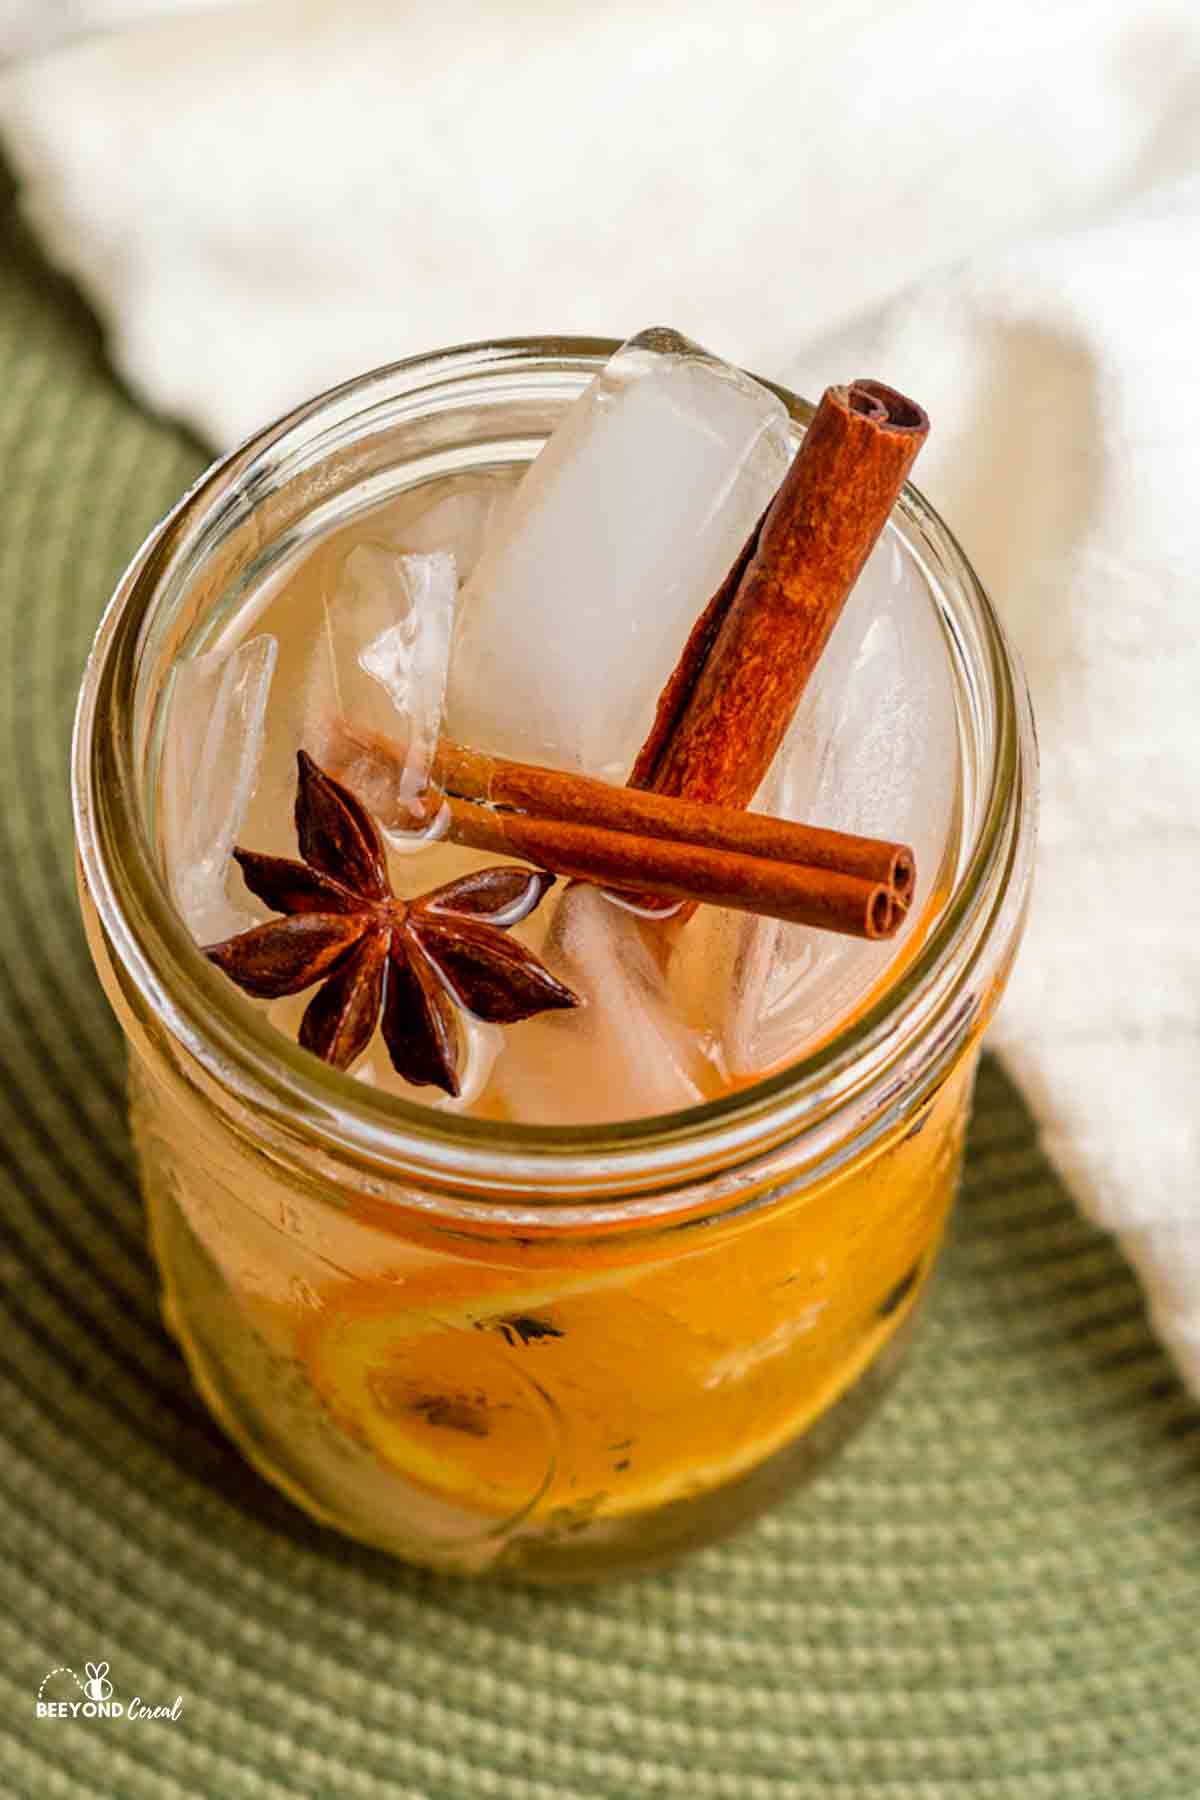 two cinnamon sticks and a star anise in an iced jar of spiced ginger ale.